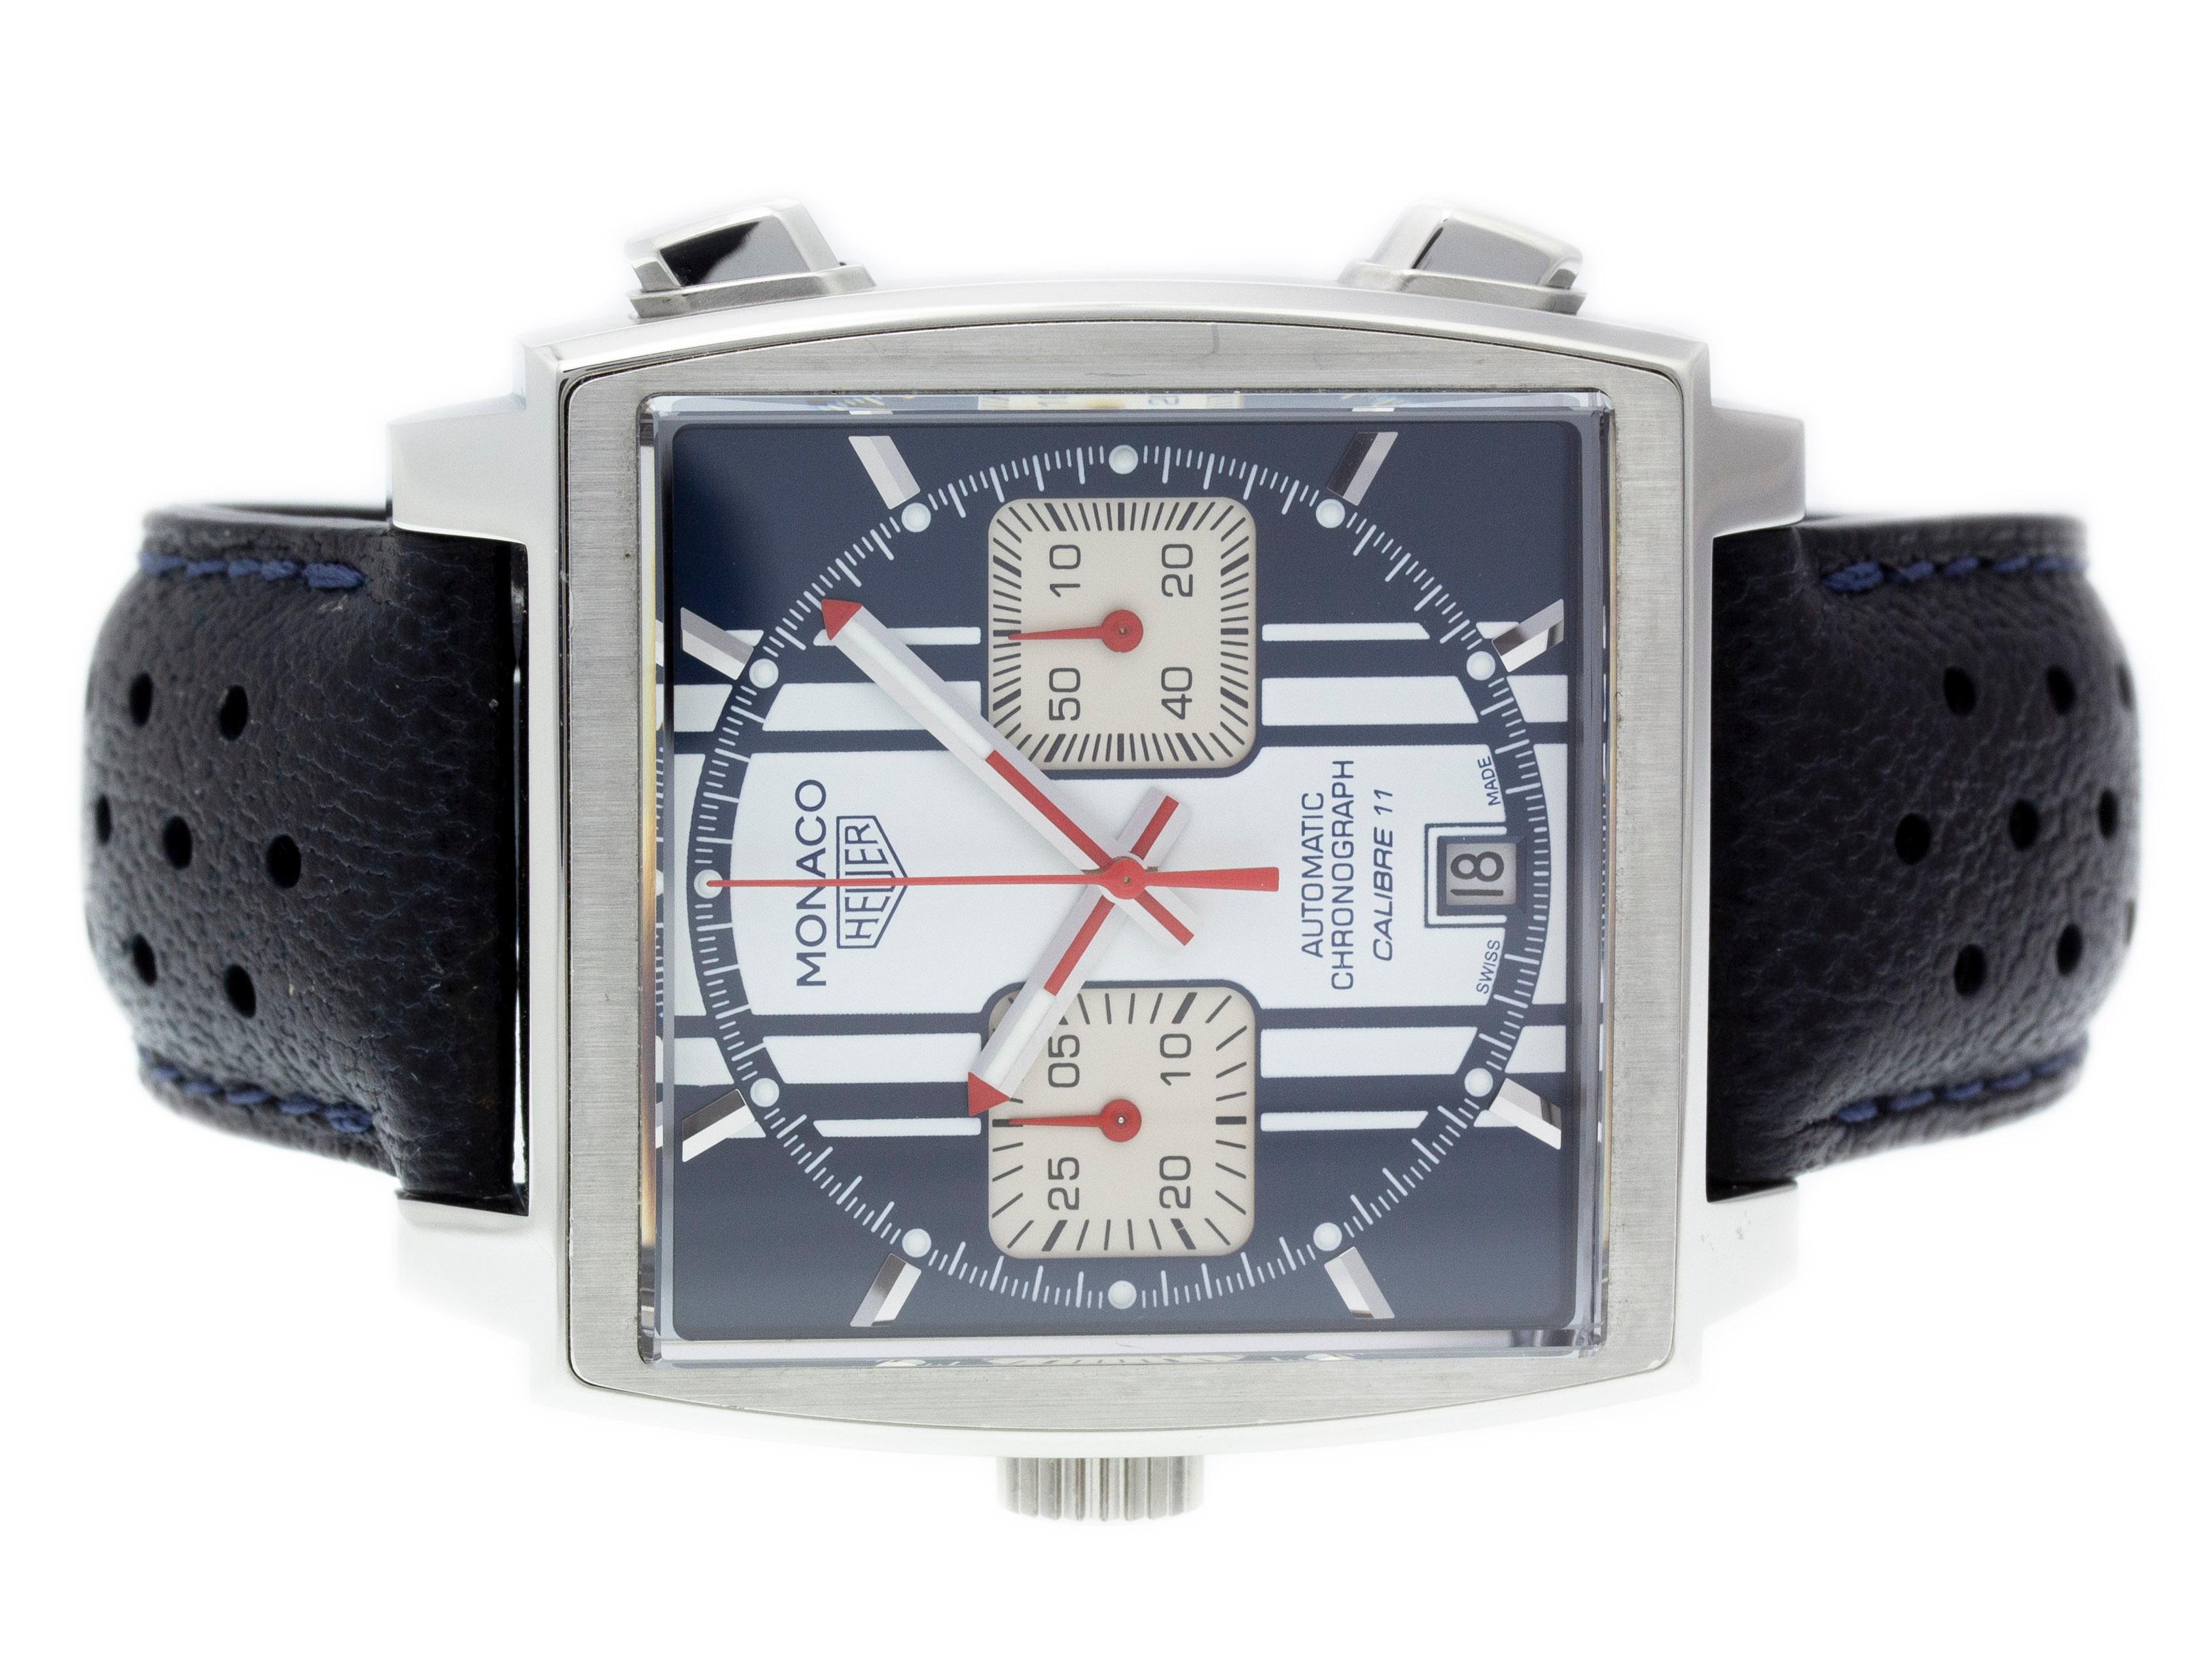 Stainless steel Tag Heuer Monaco automatic watch with a 39mm case, blue & white dial, and blue leather strap with folding clasp. Features include hours, minutes, seconds, date, and chronograph. Comes with a Tag Box and 2 Year Store